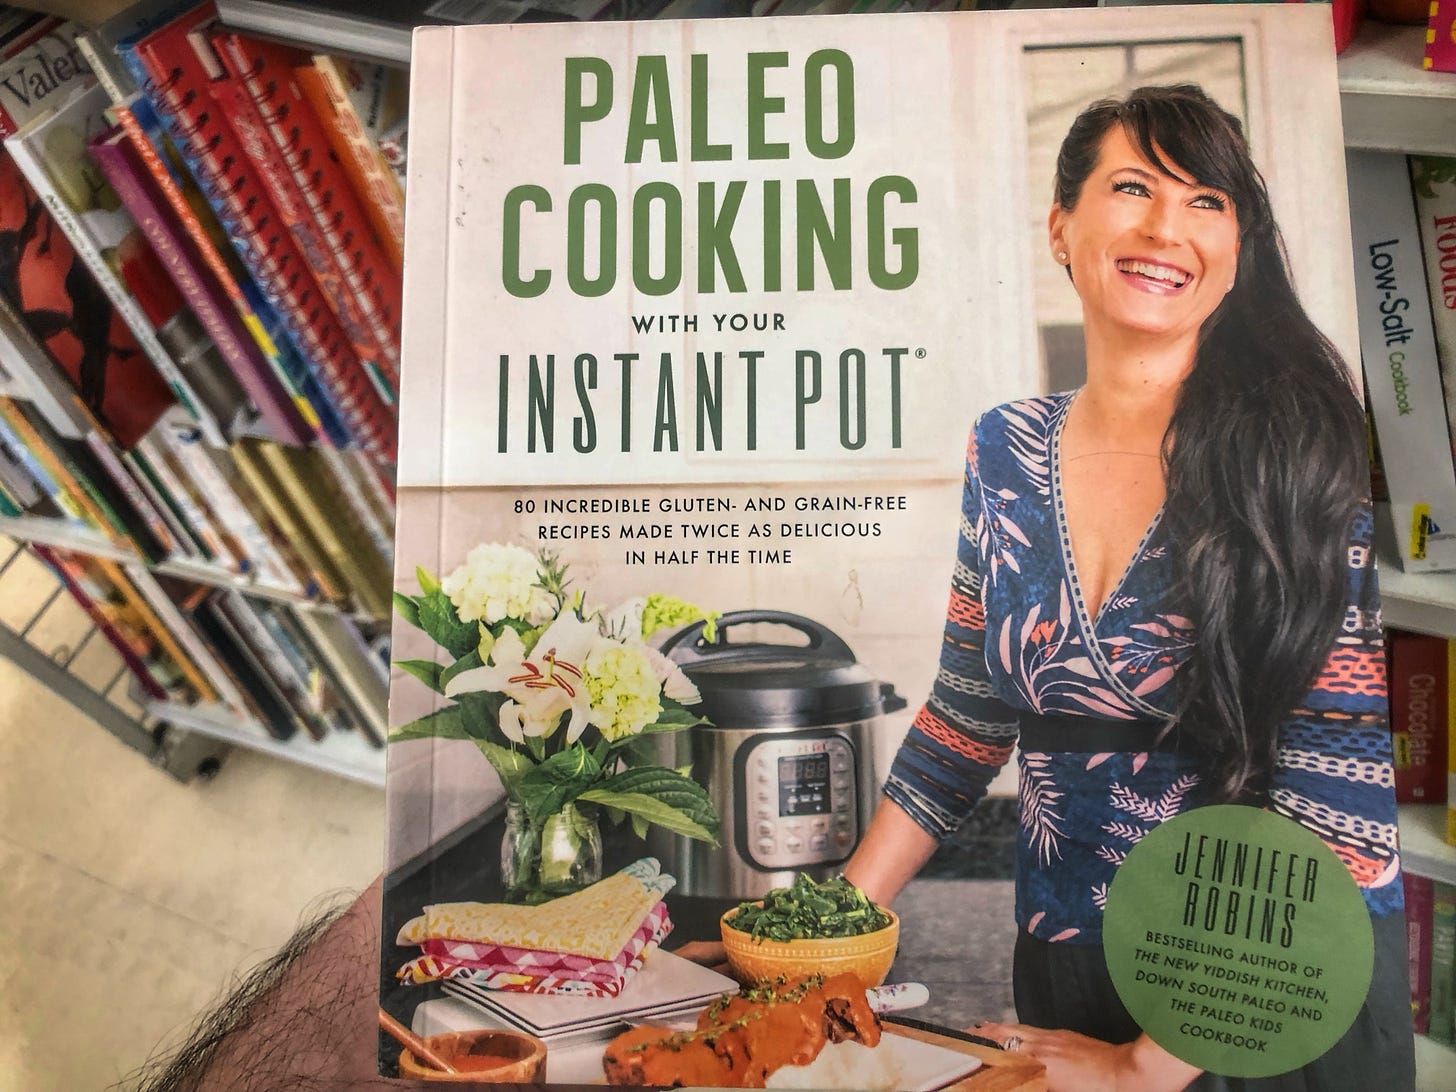 A book called "Paleo Cooking With Your Instant Pot: 80 Incredible Gluten- and Grain-Free Recipes Made Twice as Delicious in Half the Time" by Jennifer Robins, bestselling author of "The New Yiddish Kitchen," "Down South Paleo," and "The Paleo Kids Cookbook" being held up in front of a shelf of cookbooks in a thrift store.